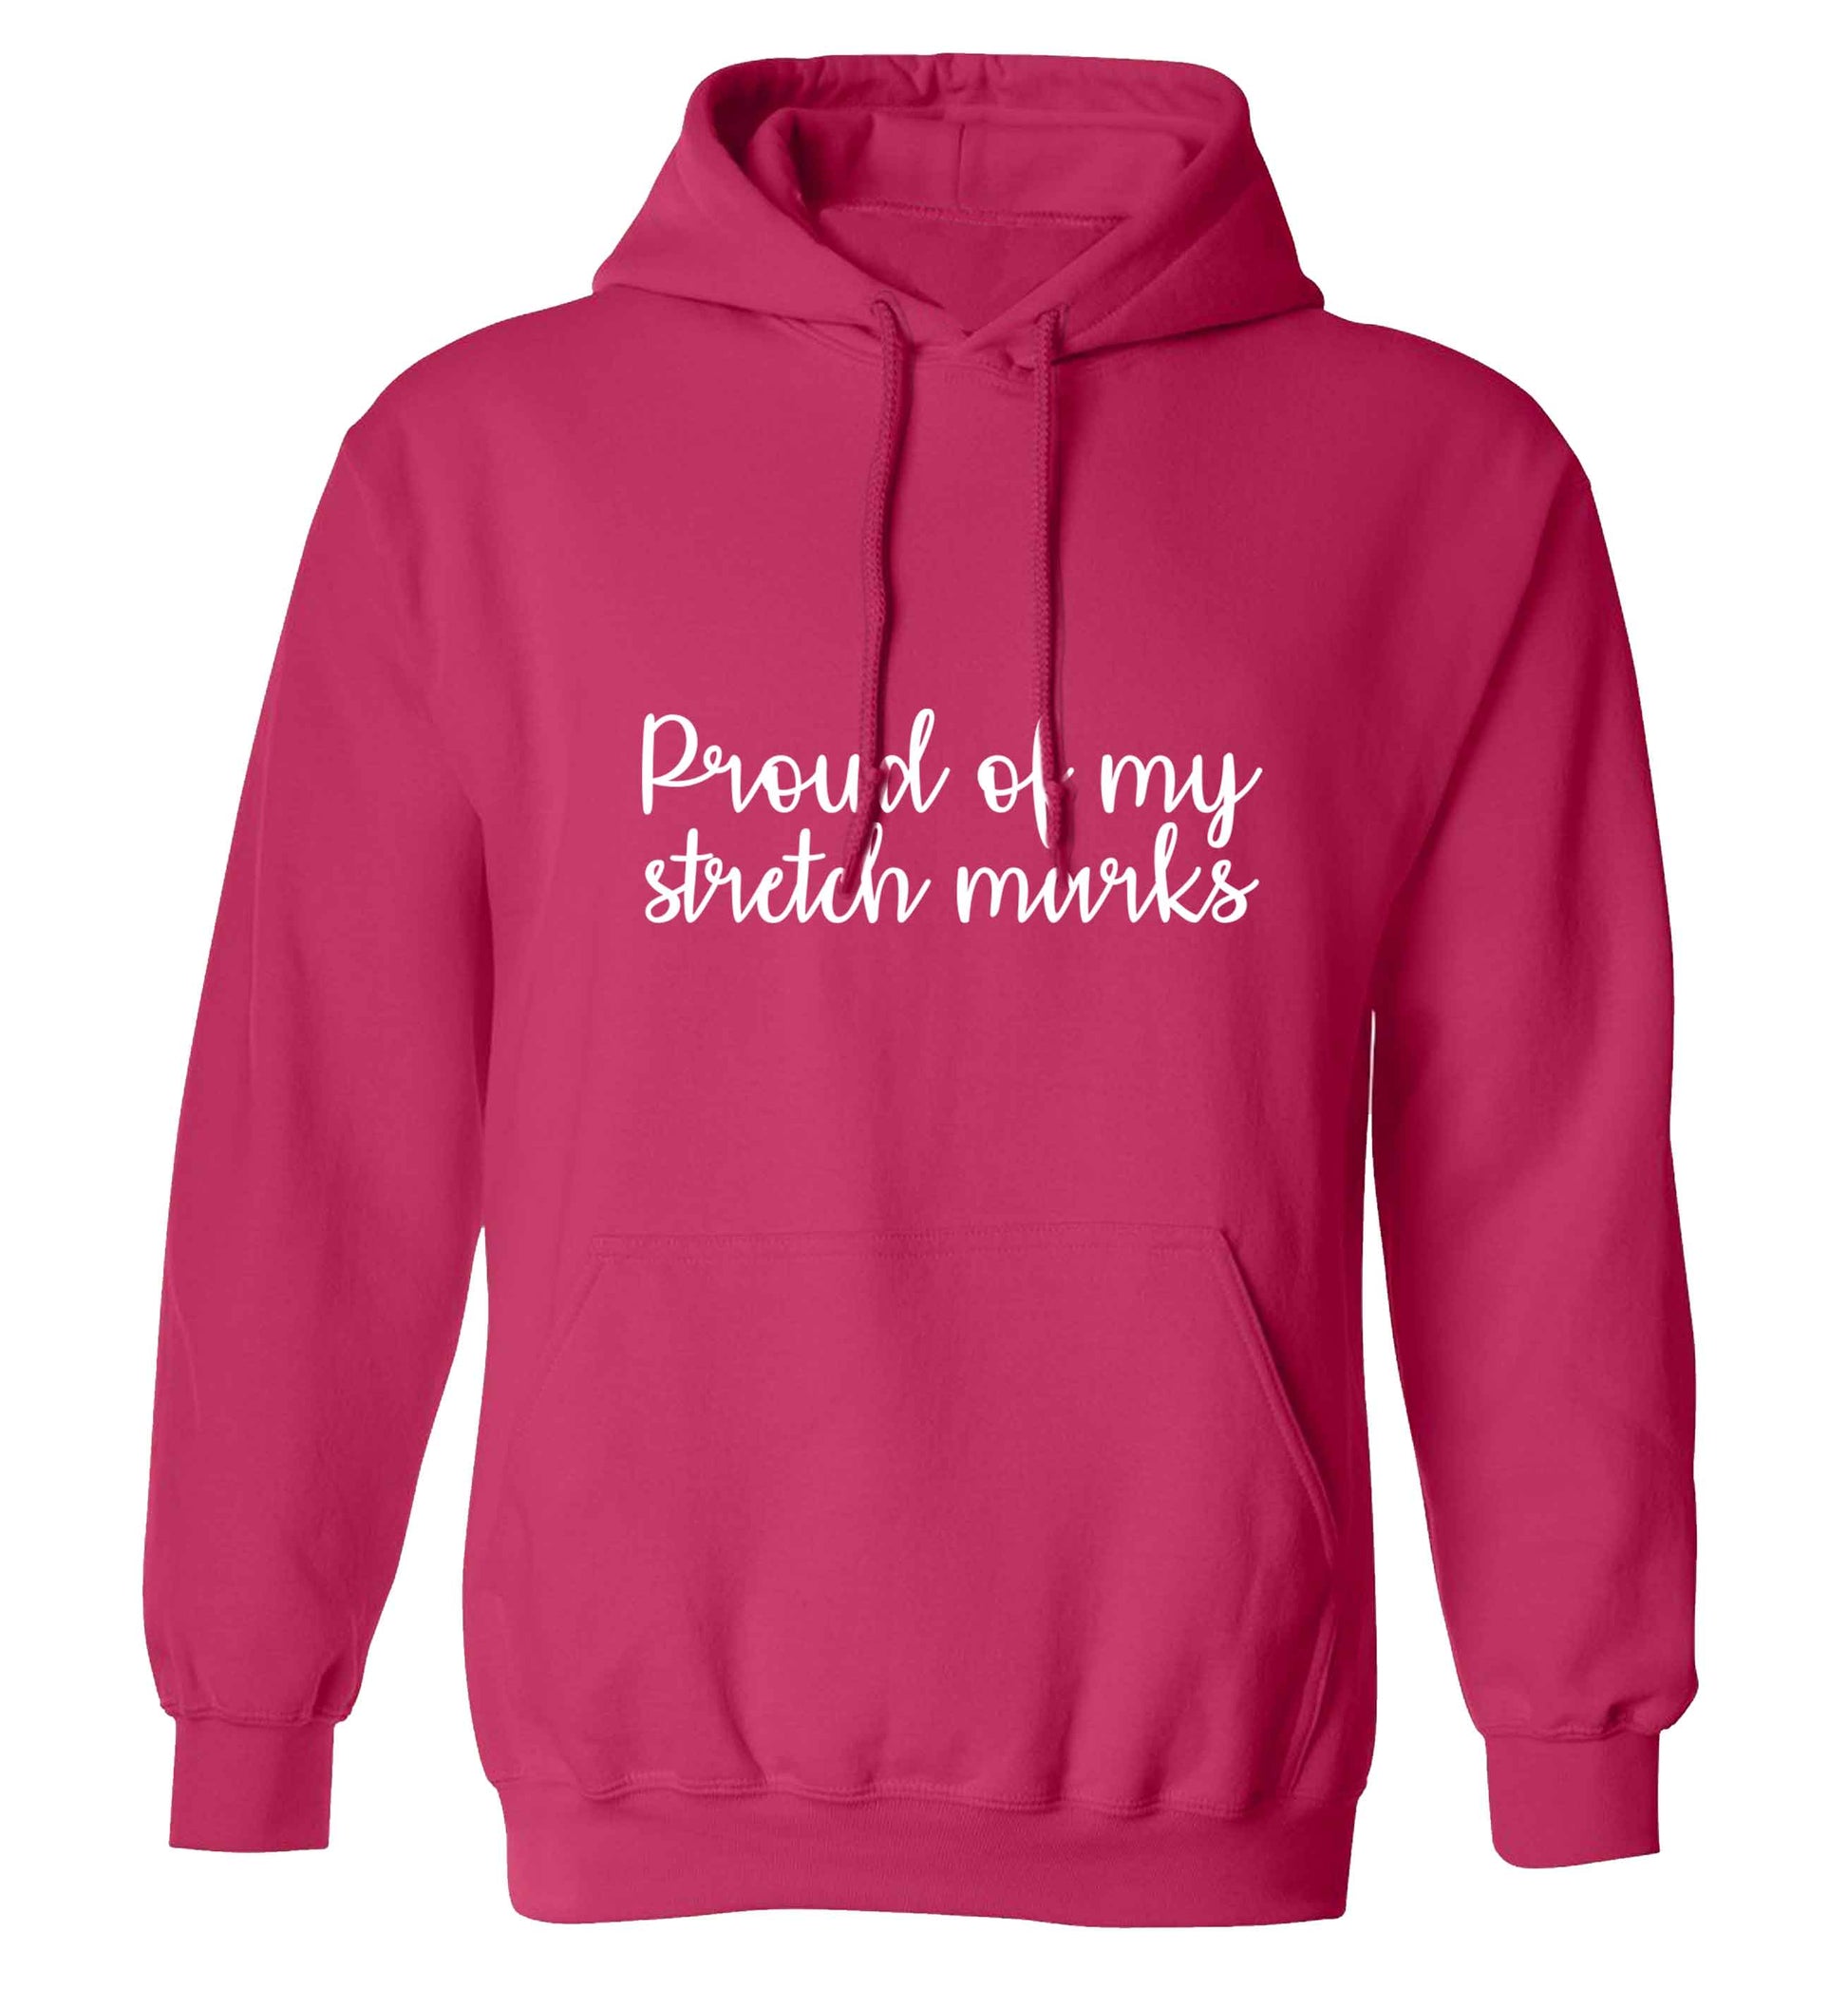 Proud of my stretch marks adults unisex pink hoodie 2XL